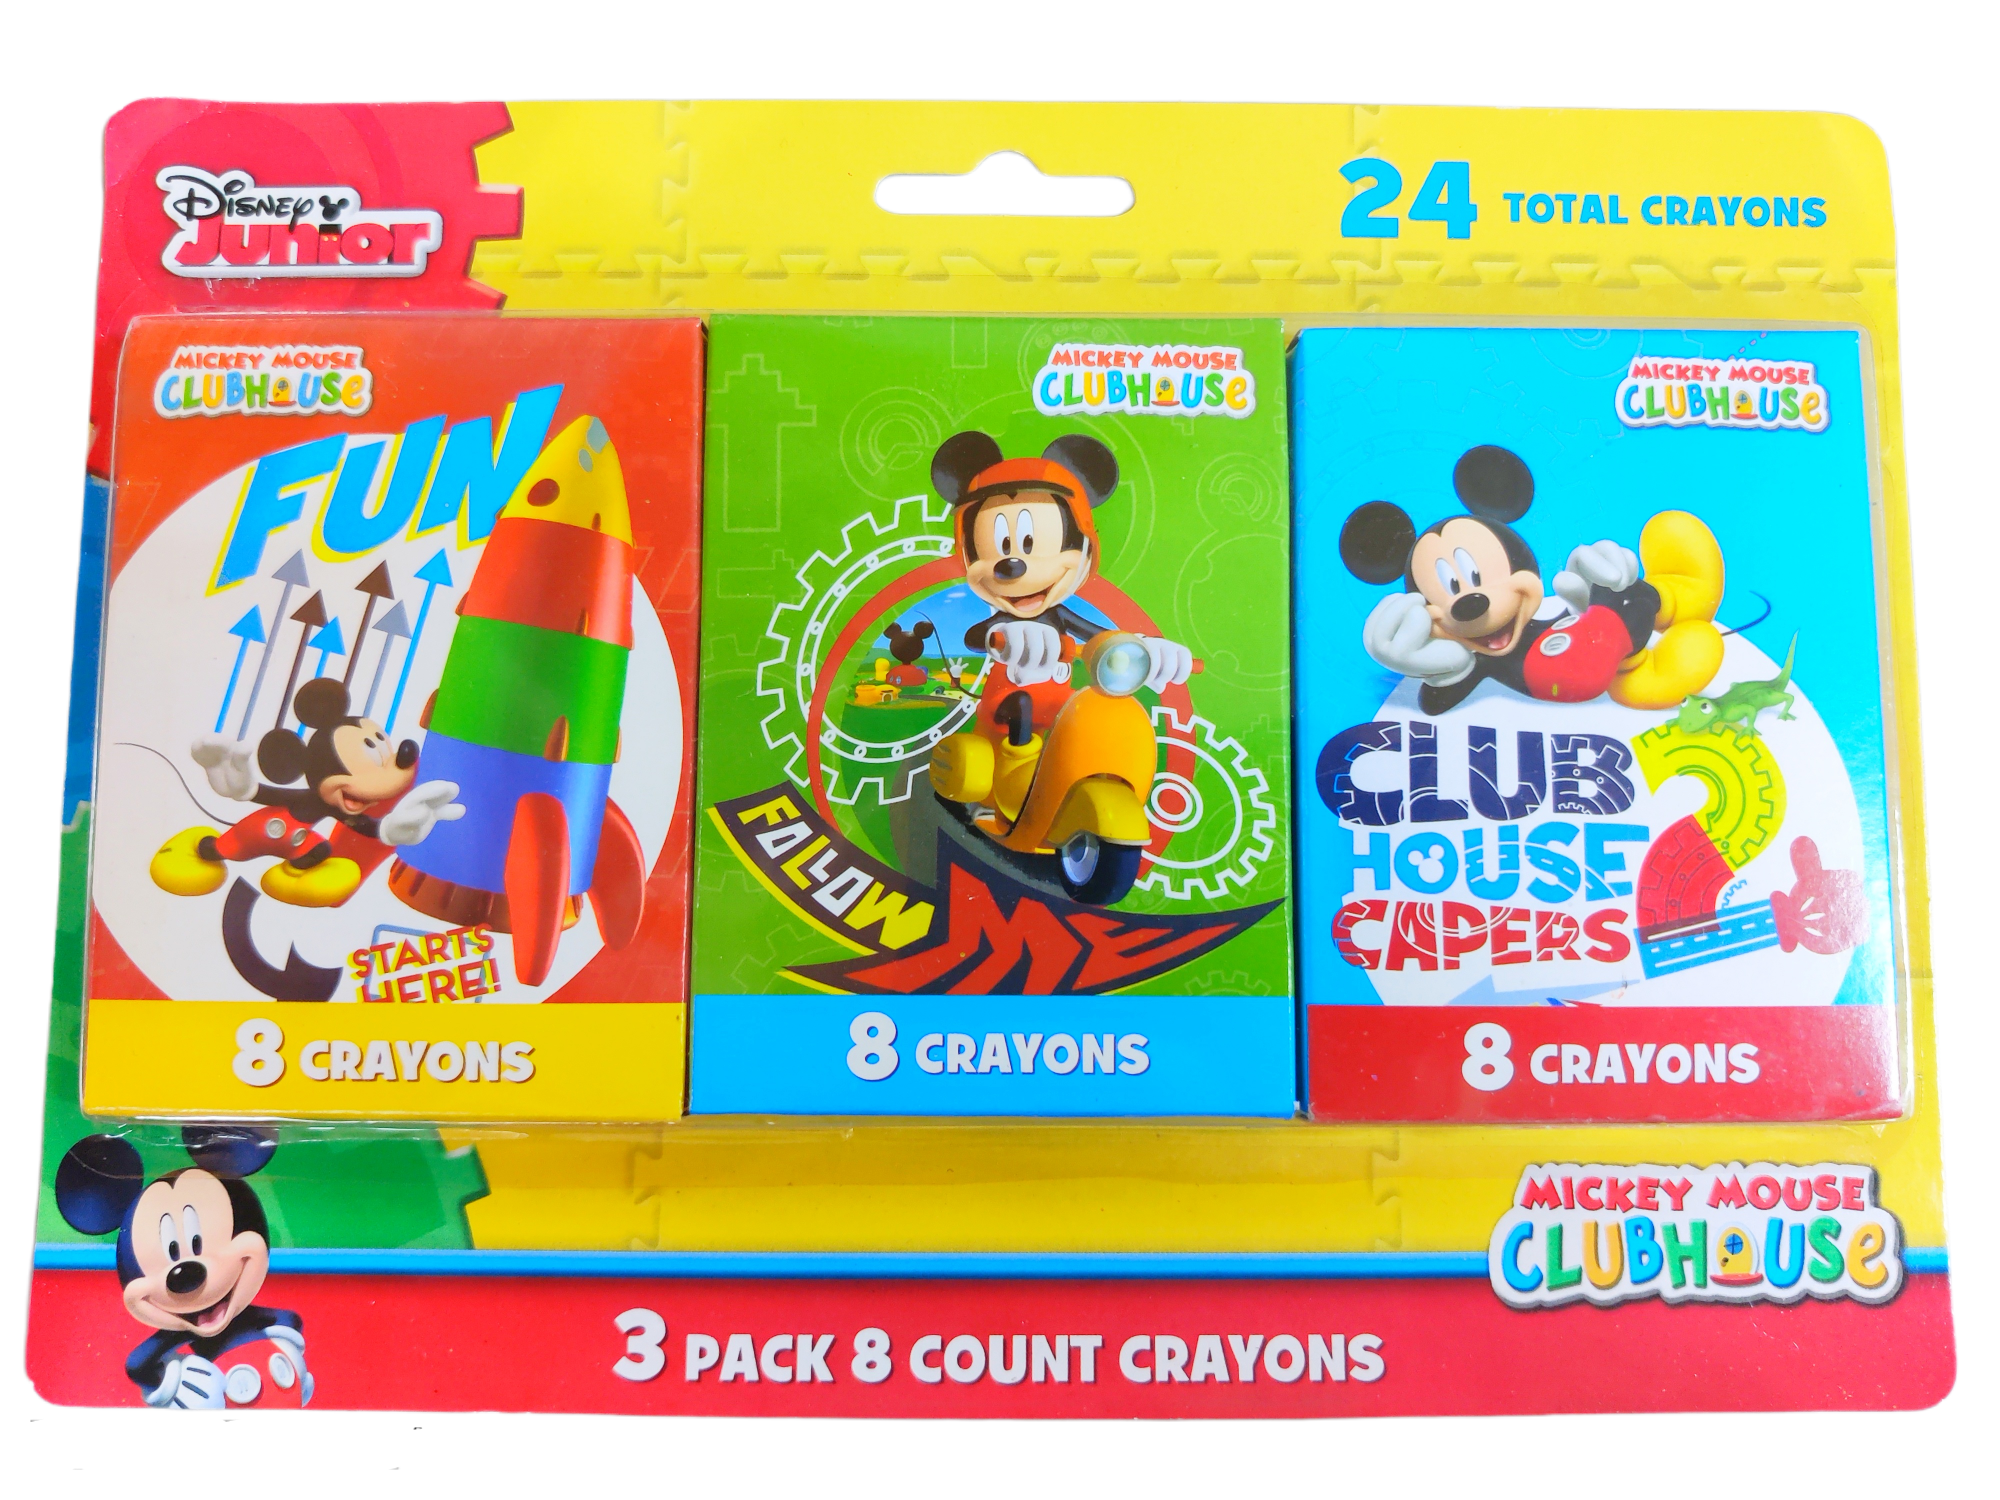 Disney Mickey Mouse Crayons - 3 Packs Of 8 Crayons